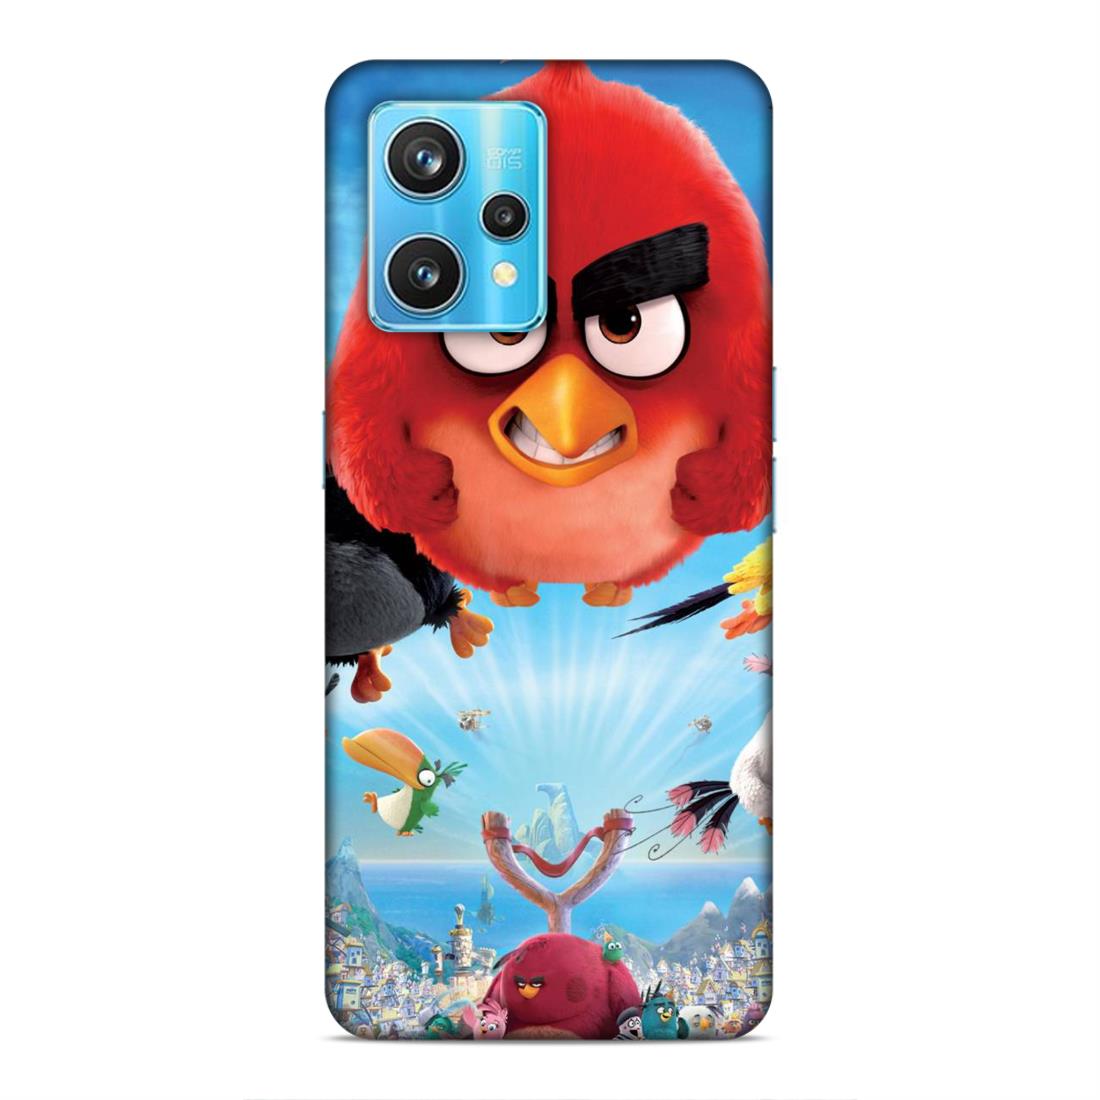 Flying Angry Bird Hard Back Case For Realme 9 / 9 Pro Plus